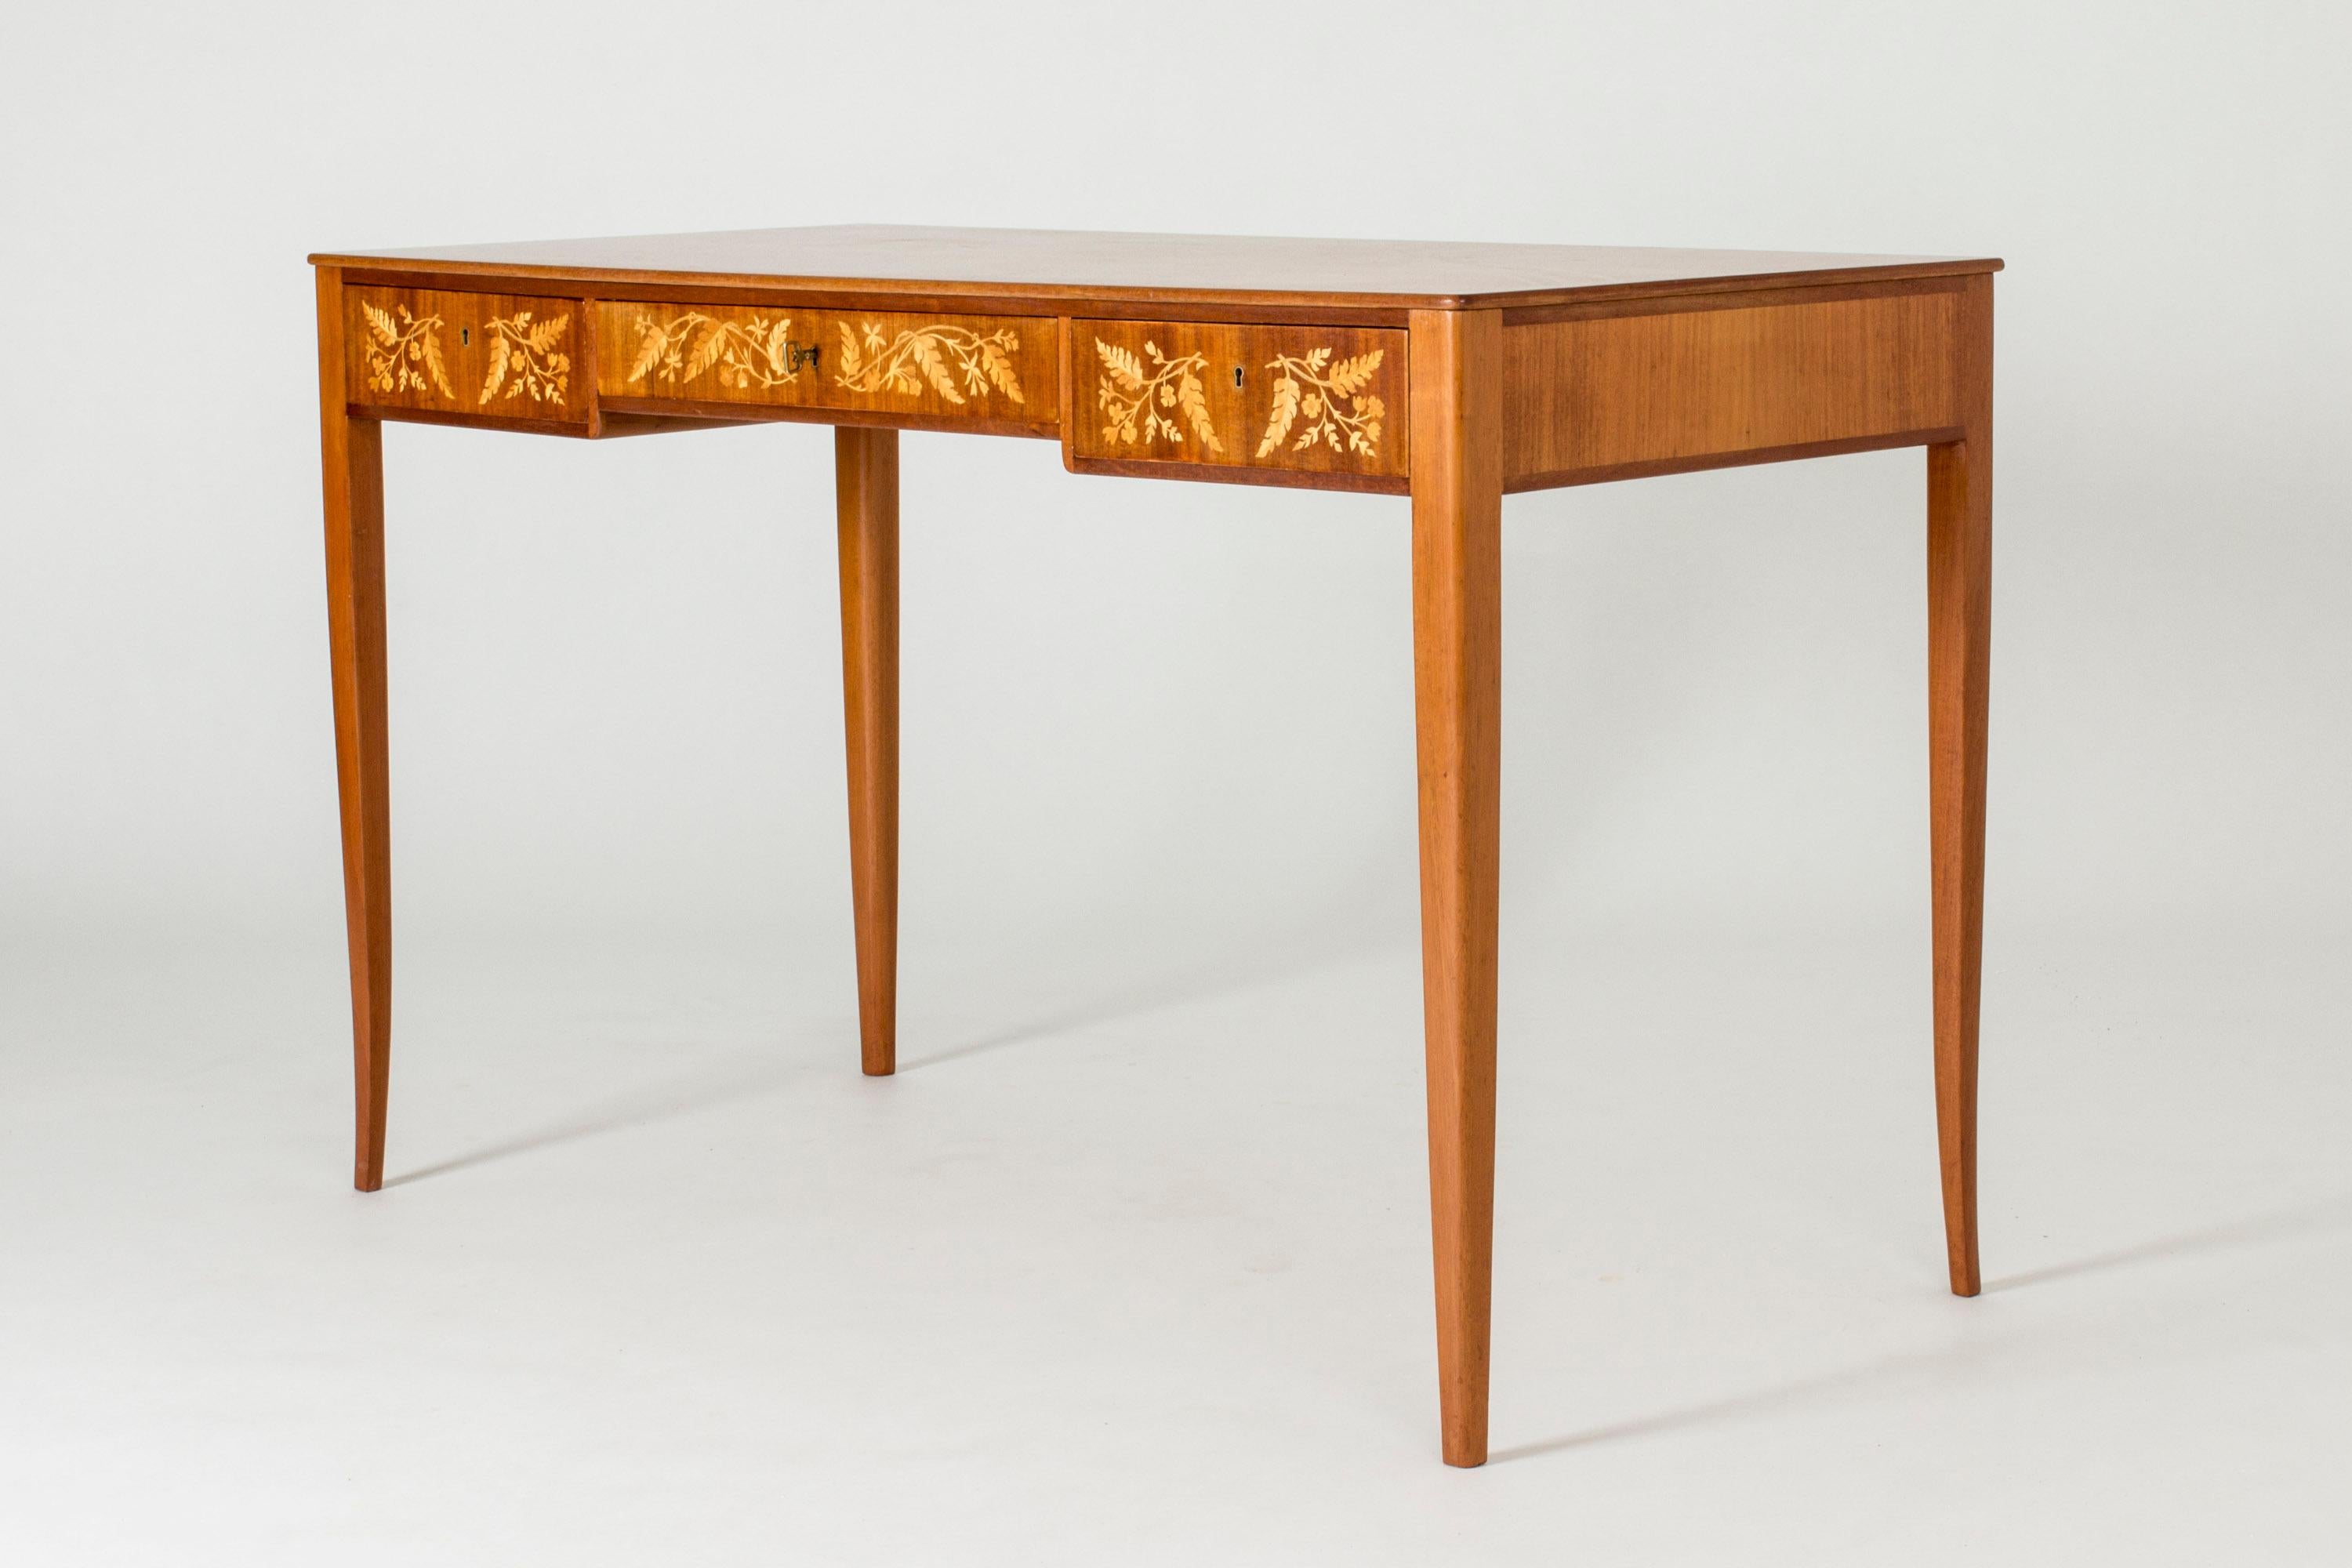 Beautiful small desk by Carl Malmsten, in a light design with slender, subtly curved legs. Lovely inlays of birch in a pattern of flowers and leaves.